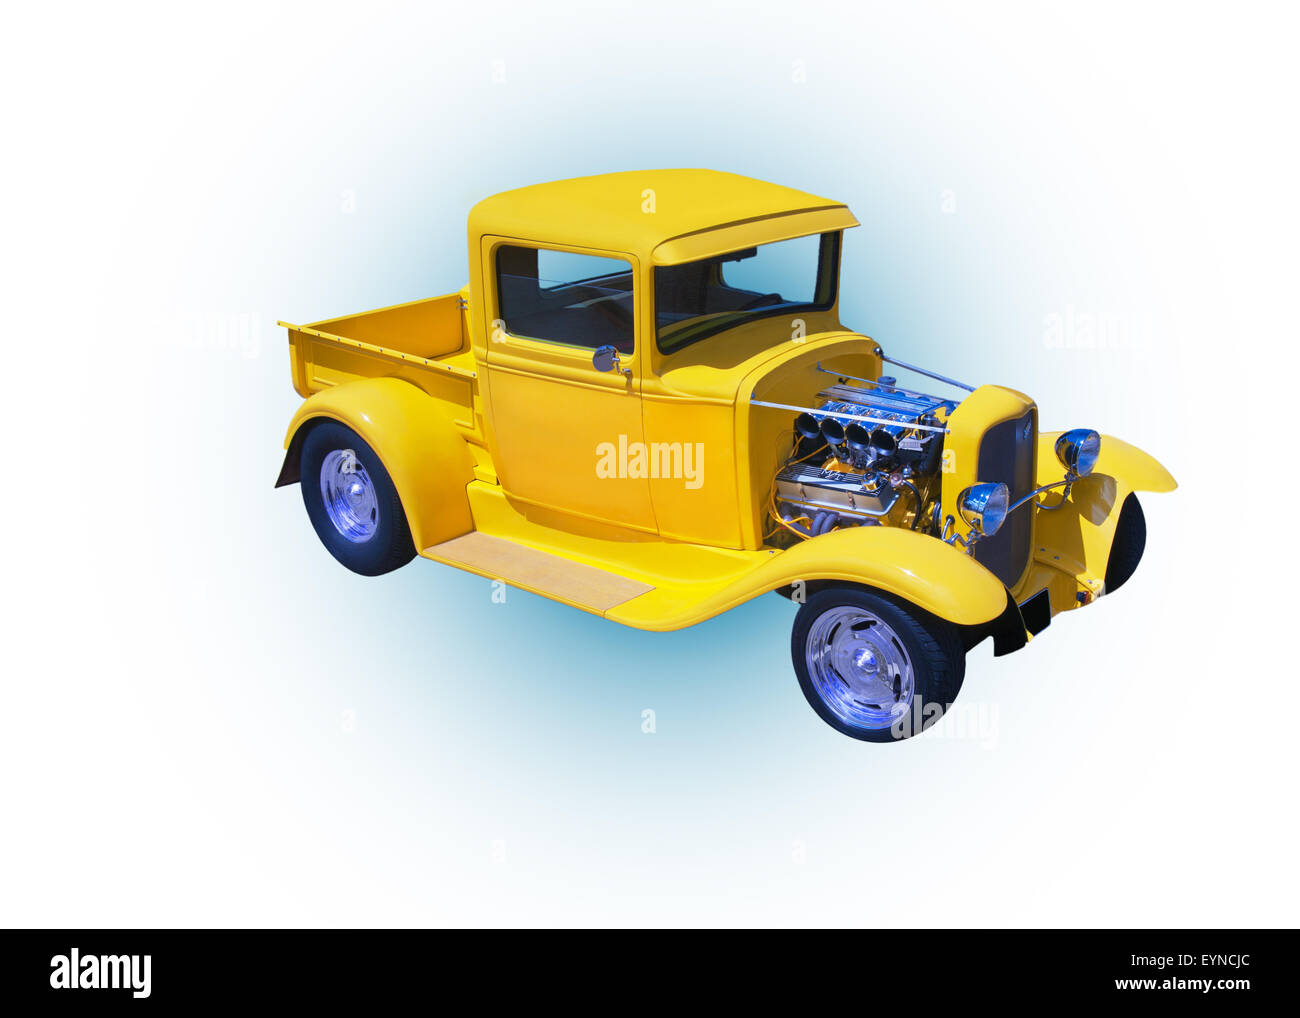 Yellow 1932 Ford Truck model BB on white background with blue dot in the center. Stock Photo